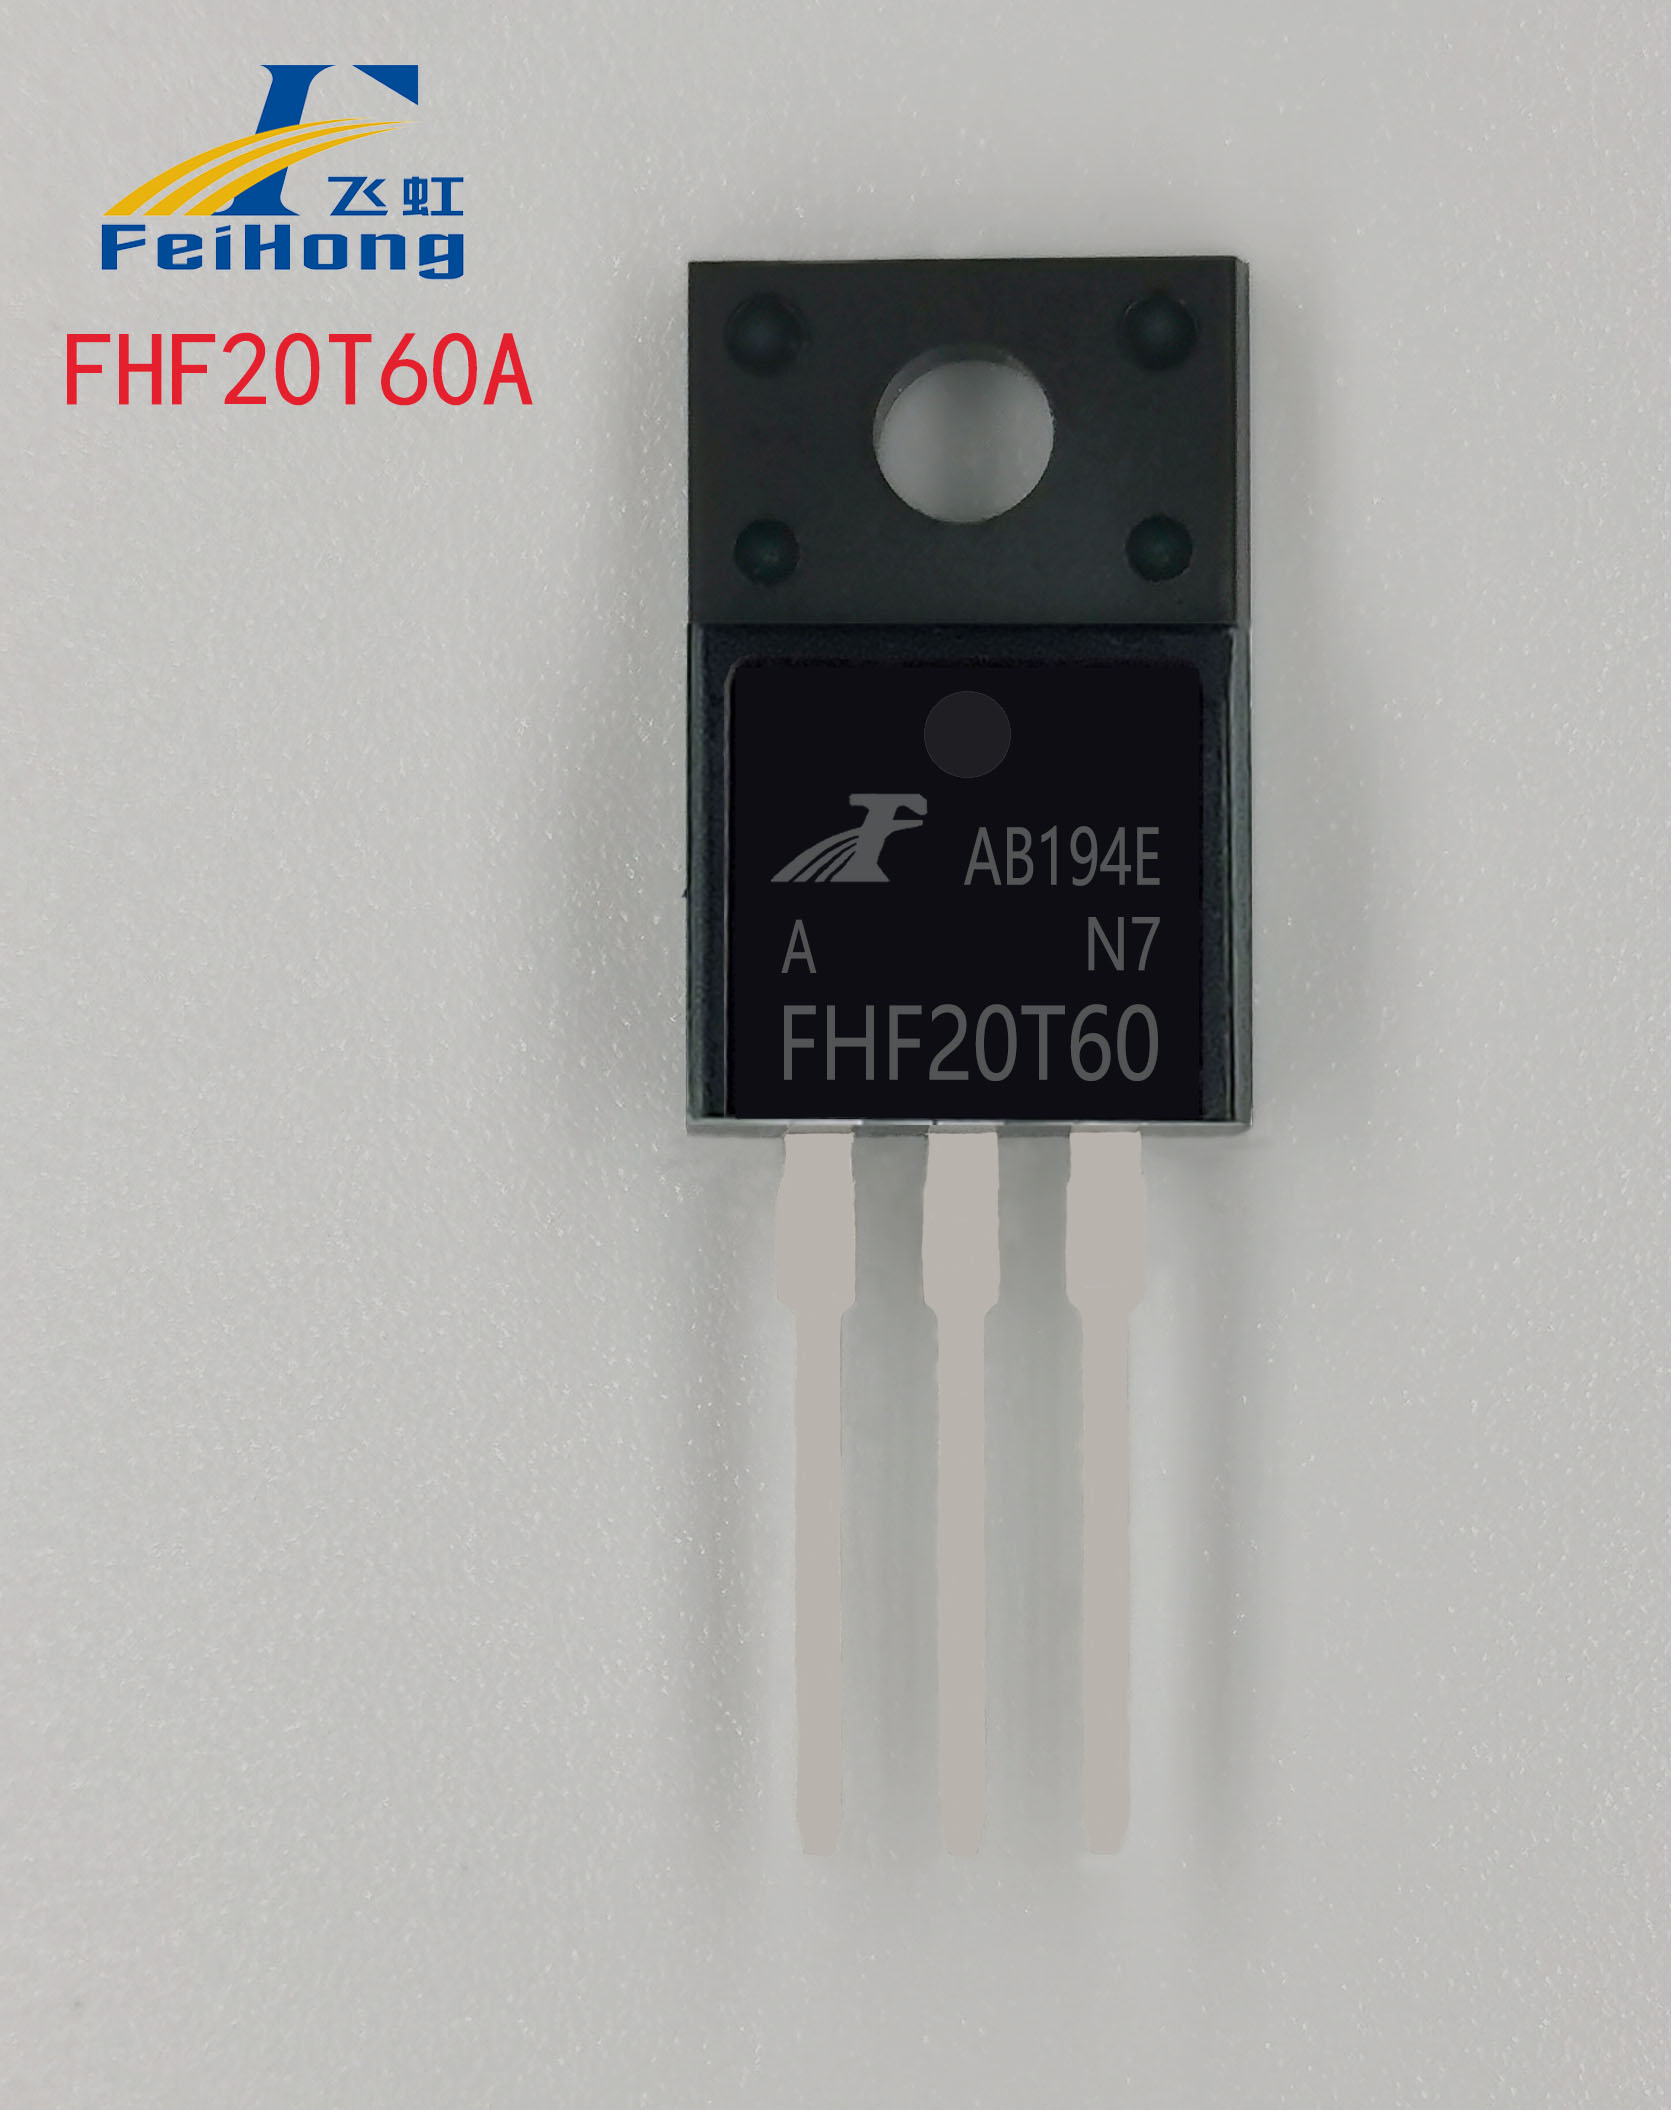 FHF20T60A